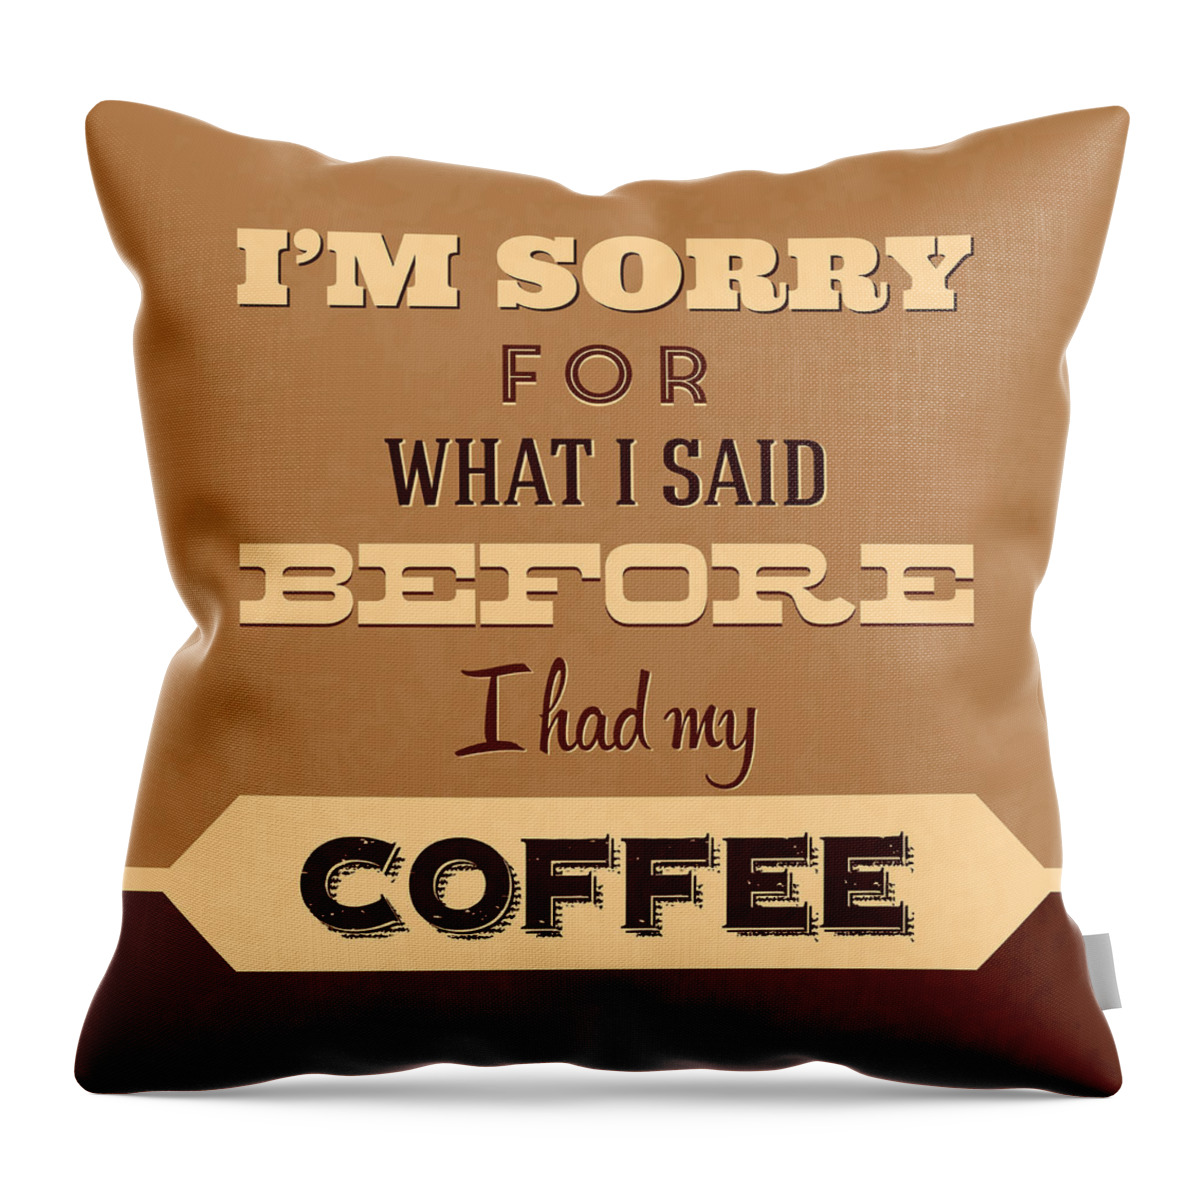  Throw Pillow featuring the digital art I'm Sorry For What I Said Before Coffee by Naxart Studio